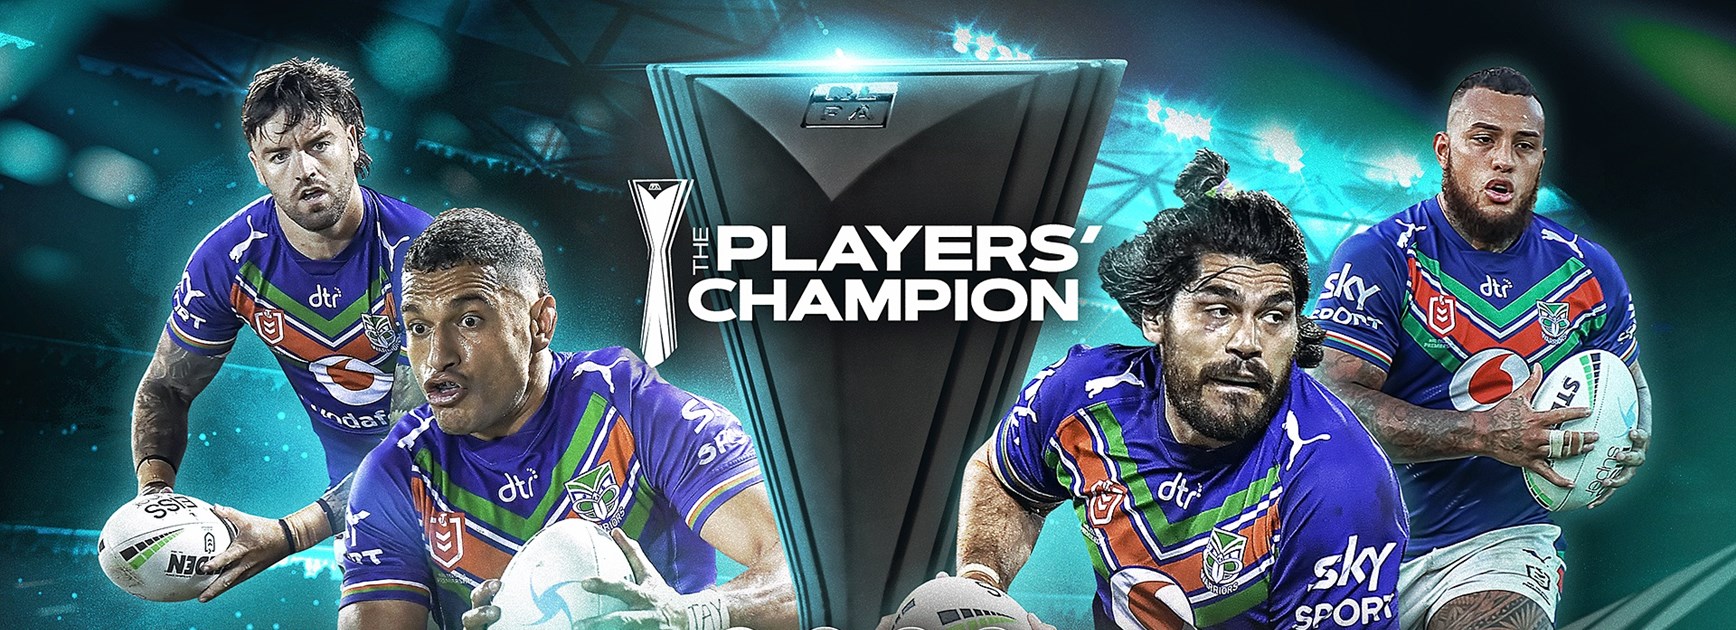 Quartet chosen as contenders for Players' Champion